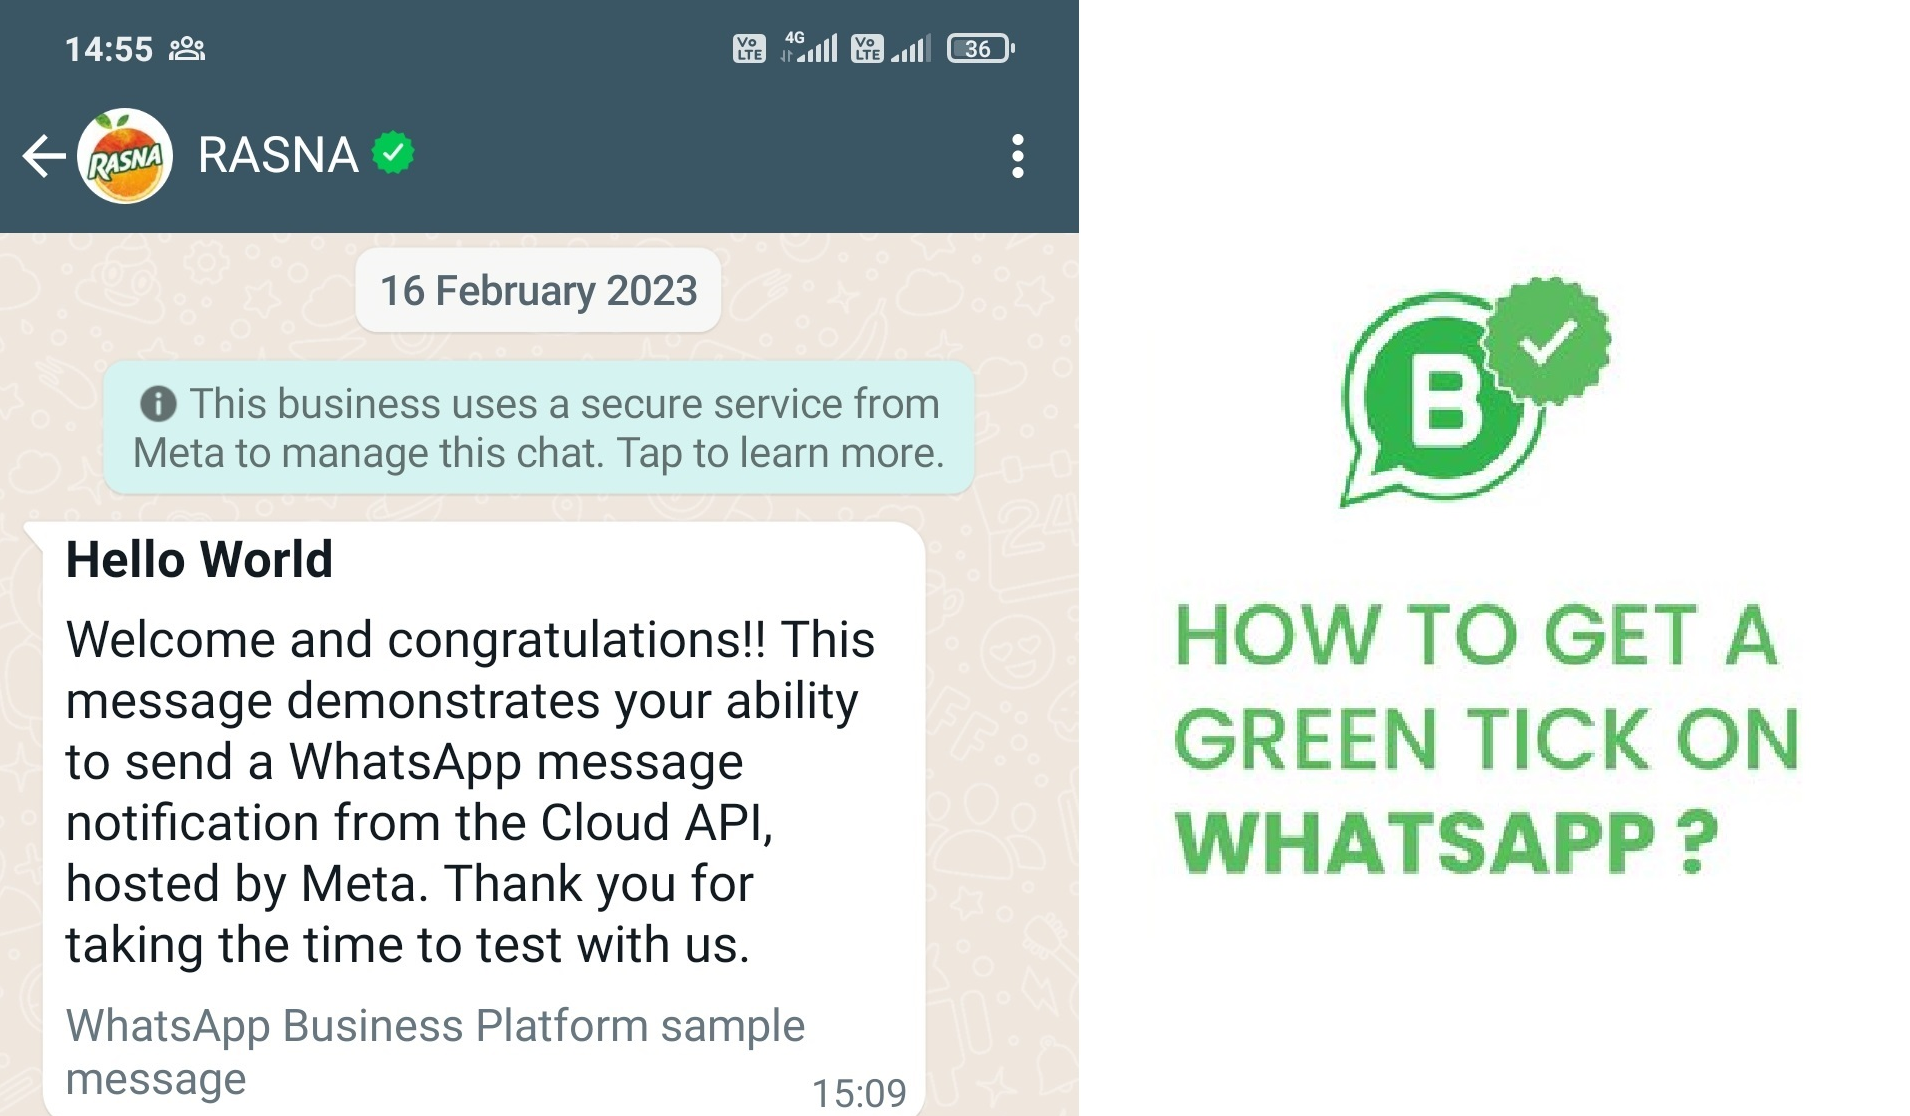 Enhancing Your WhatsApp Profile: How to apply for Green tick for Whatsapp Number